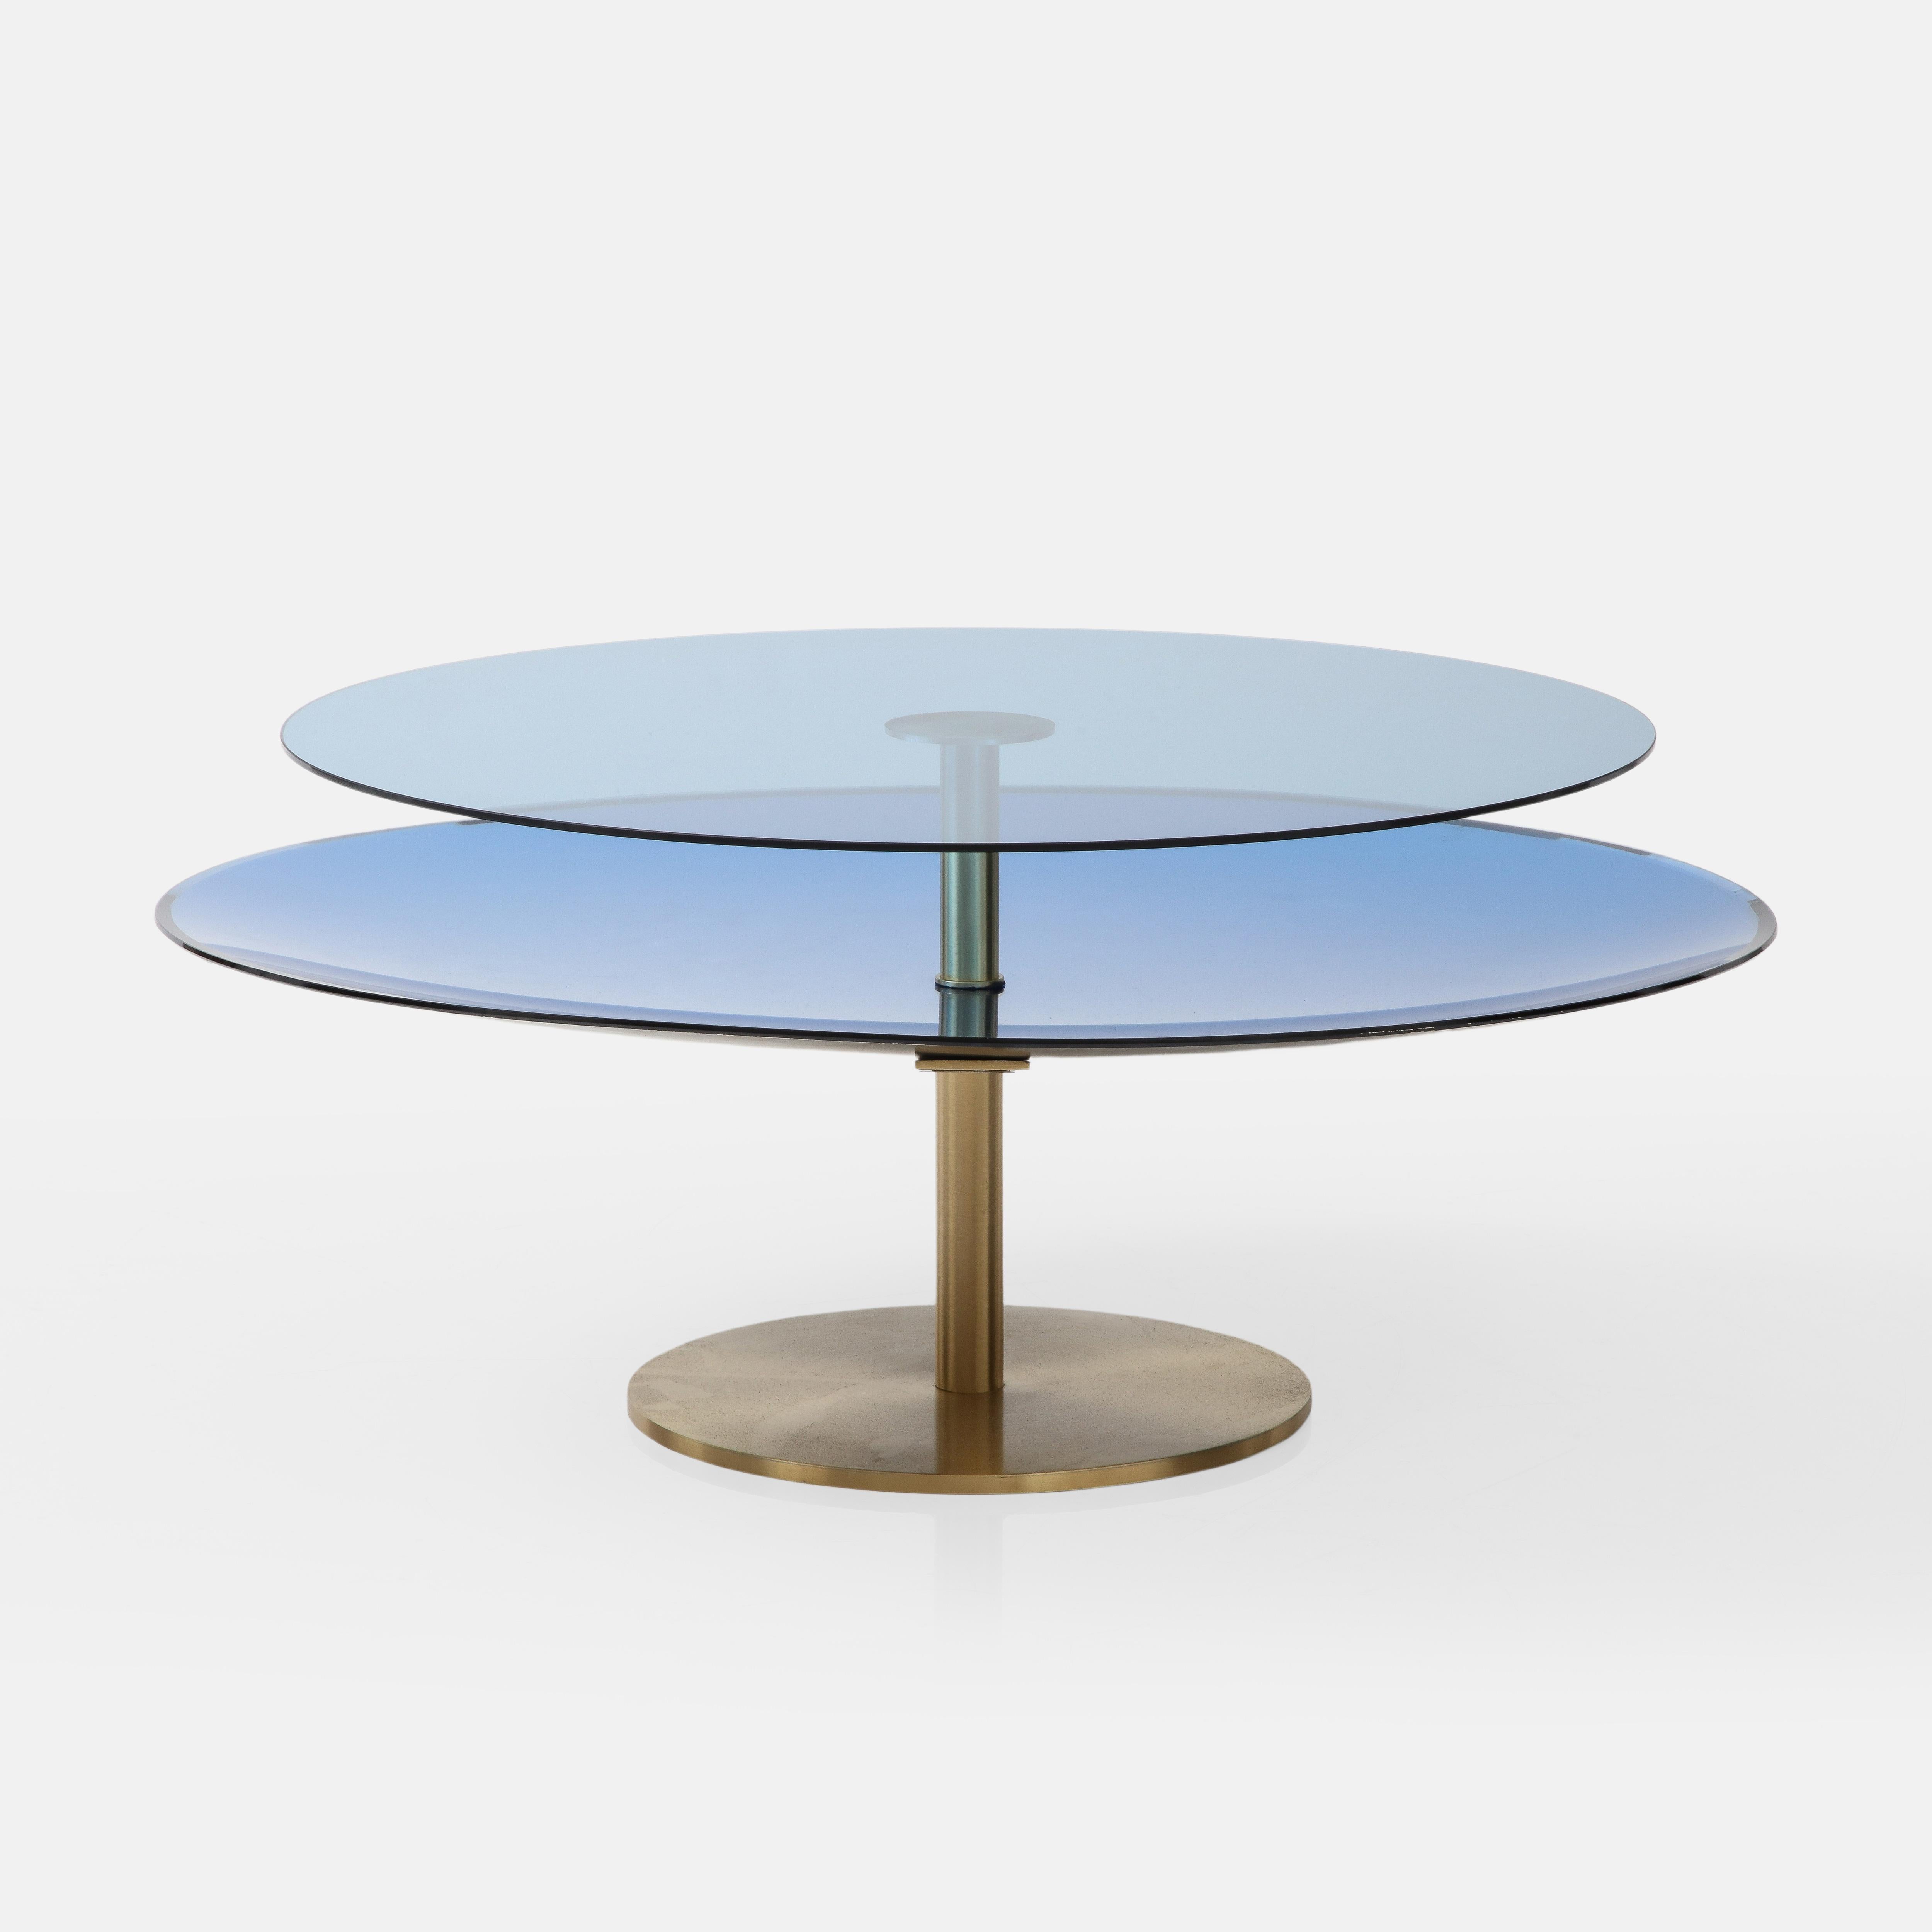 Effetto Vetro exquisite custom contemporary two tier round coffee table consisting of a colored concave mirrored glass disc below with a clear colored flat glass disc above mounted on a brushed brass pedestal structure. This lovely sculptural coffee